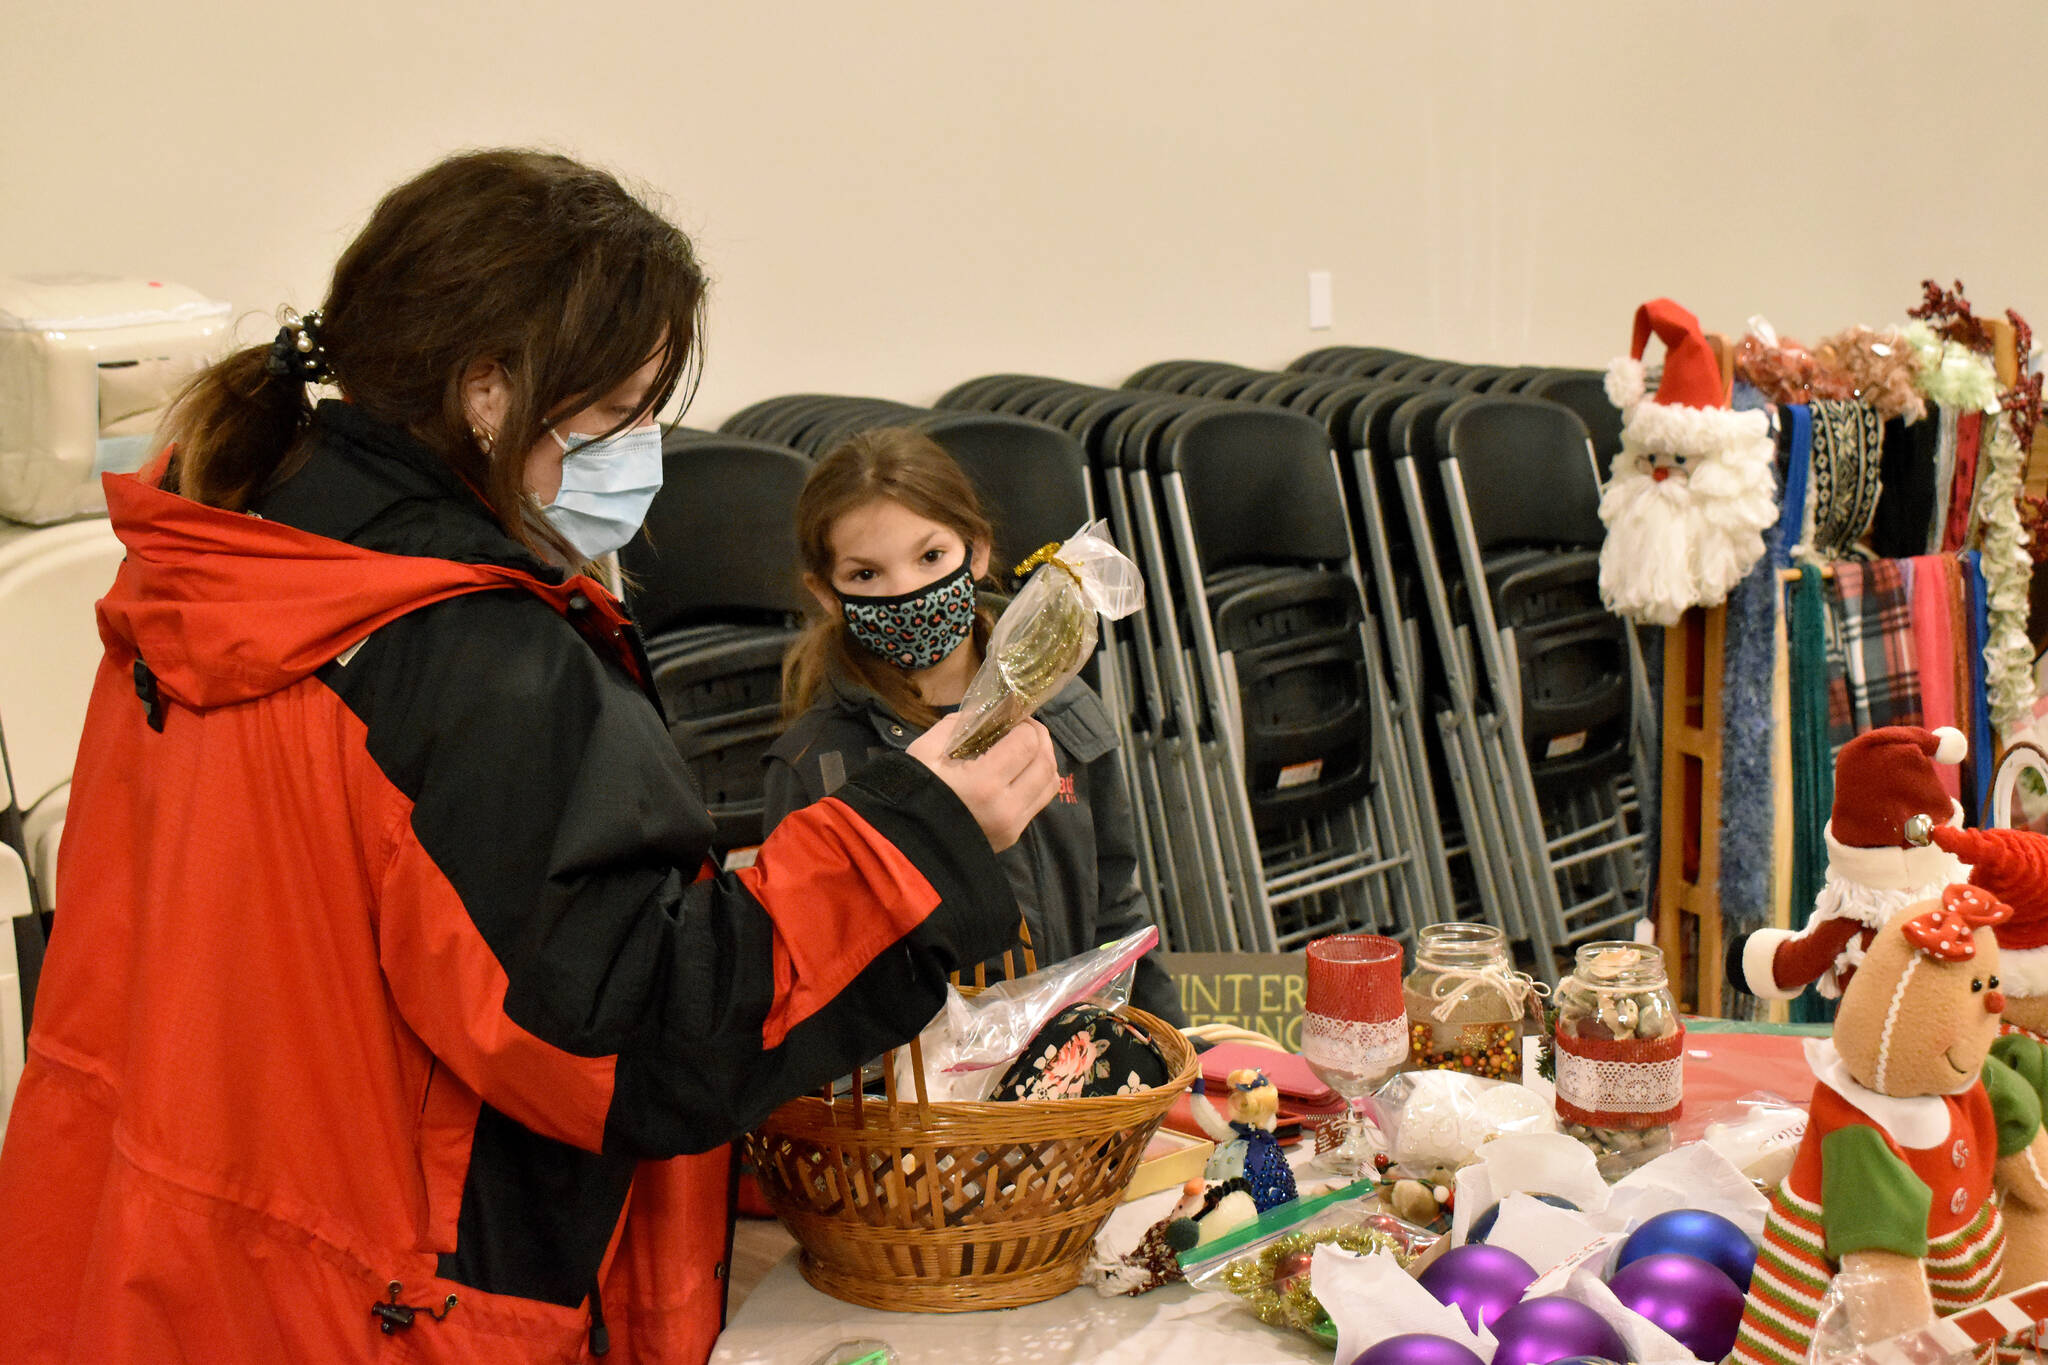 Photo by Alex Bruell
Andrea Tarling and her daughter Izzy, Buckley residents, look over items at the holiday bazaar.